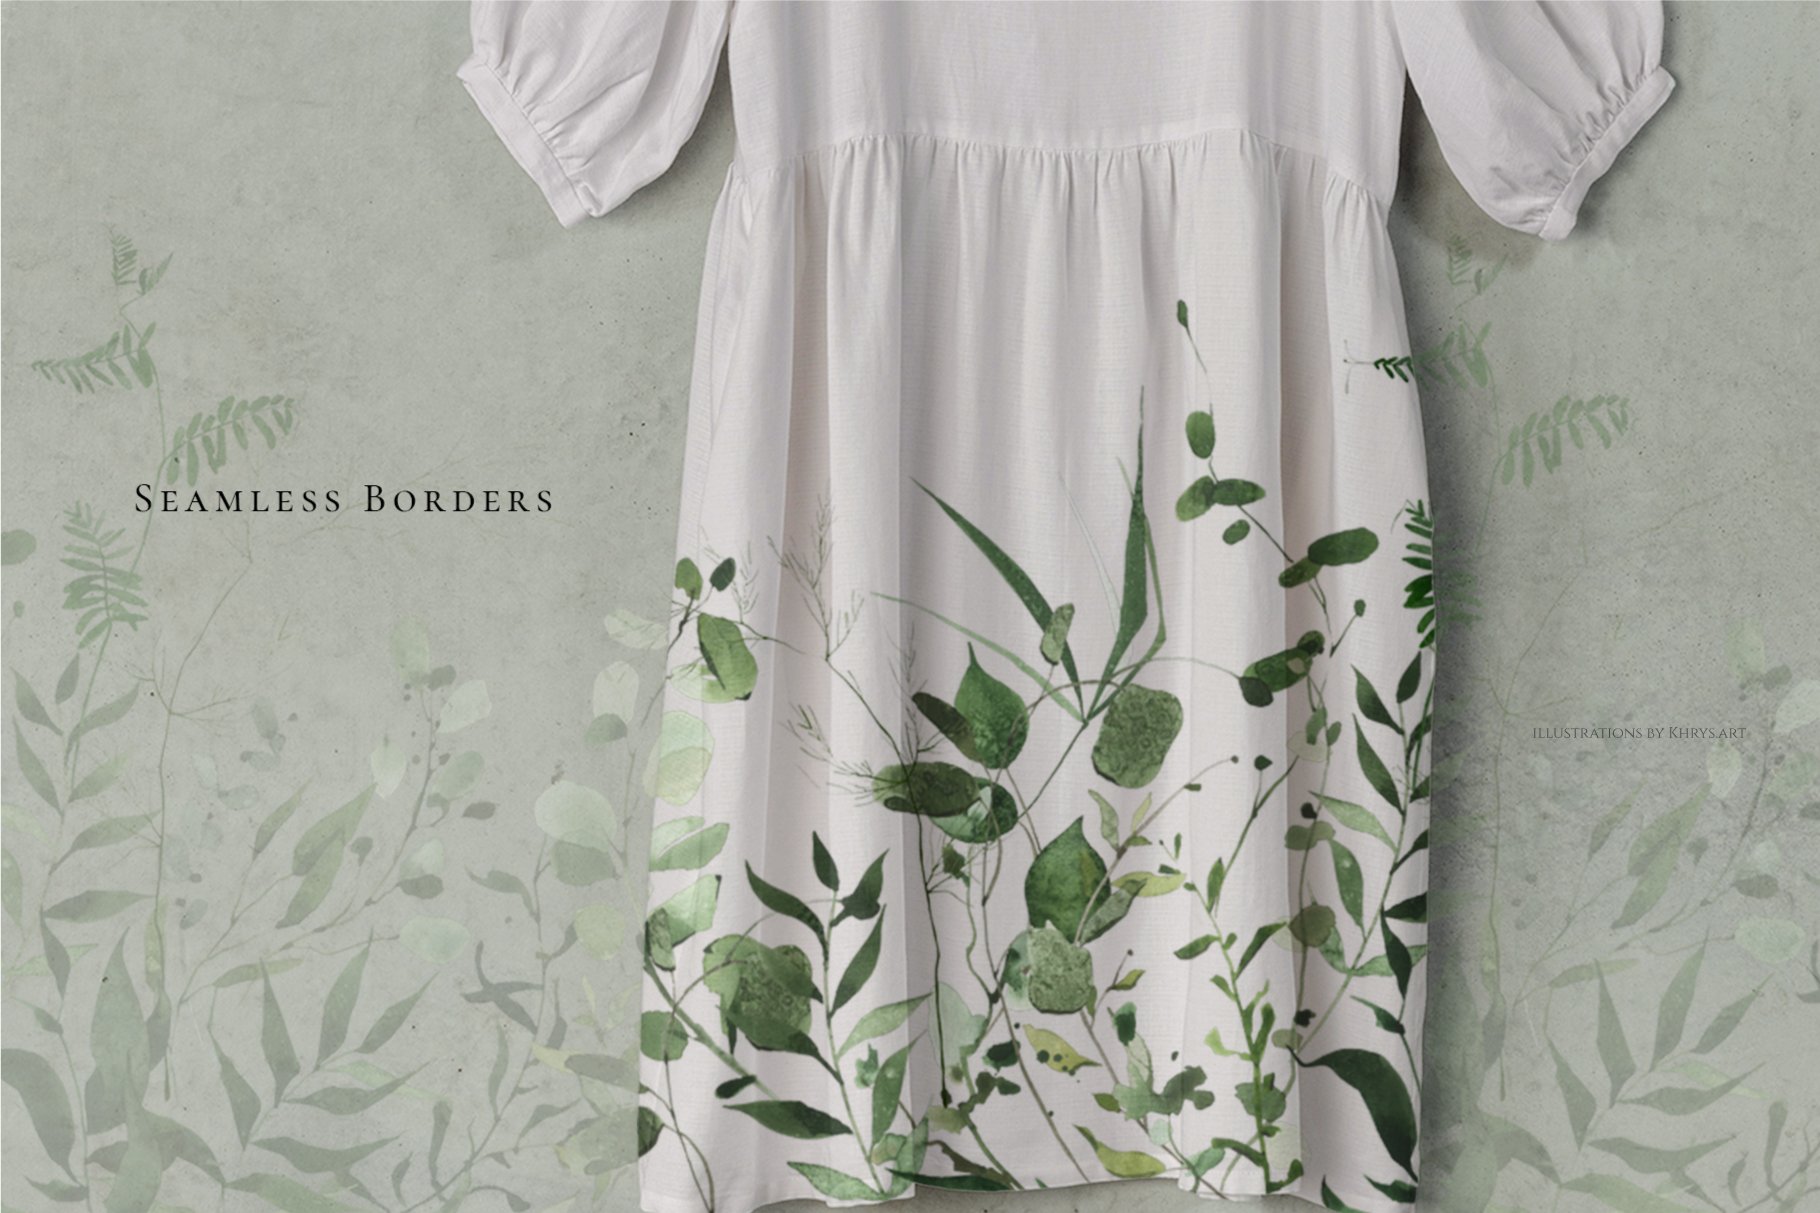 White dress with green leaves on it.